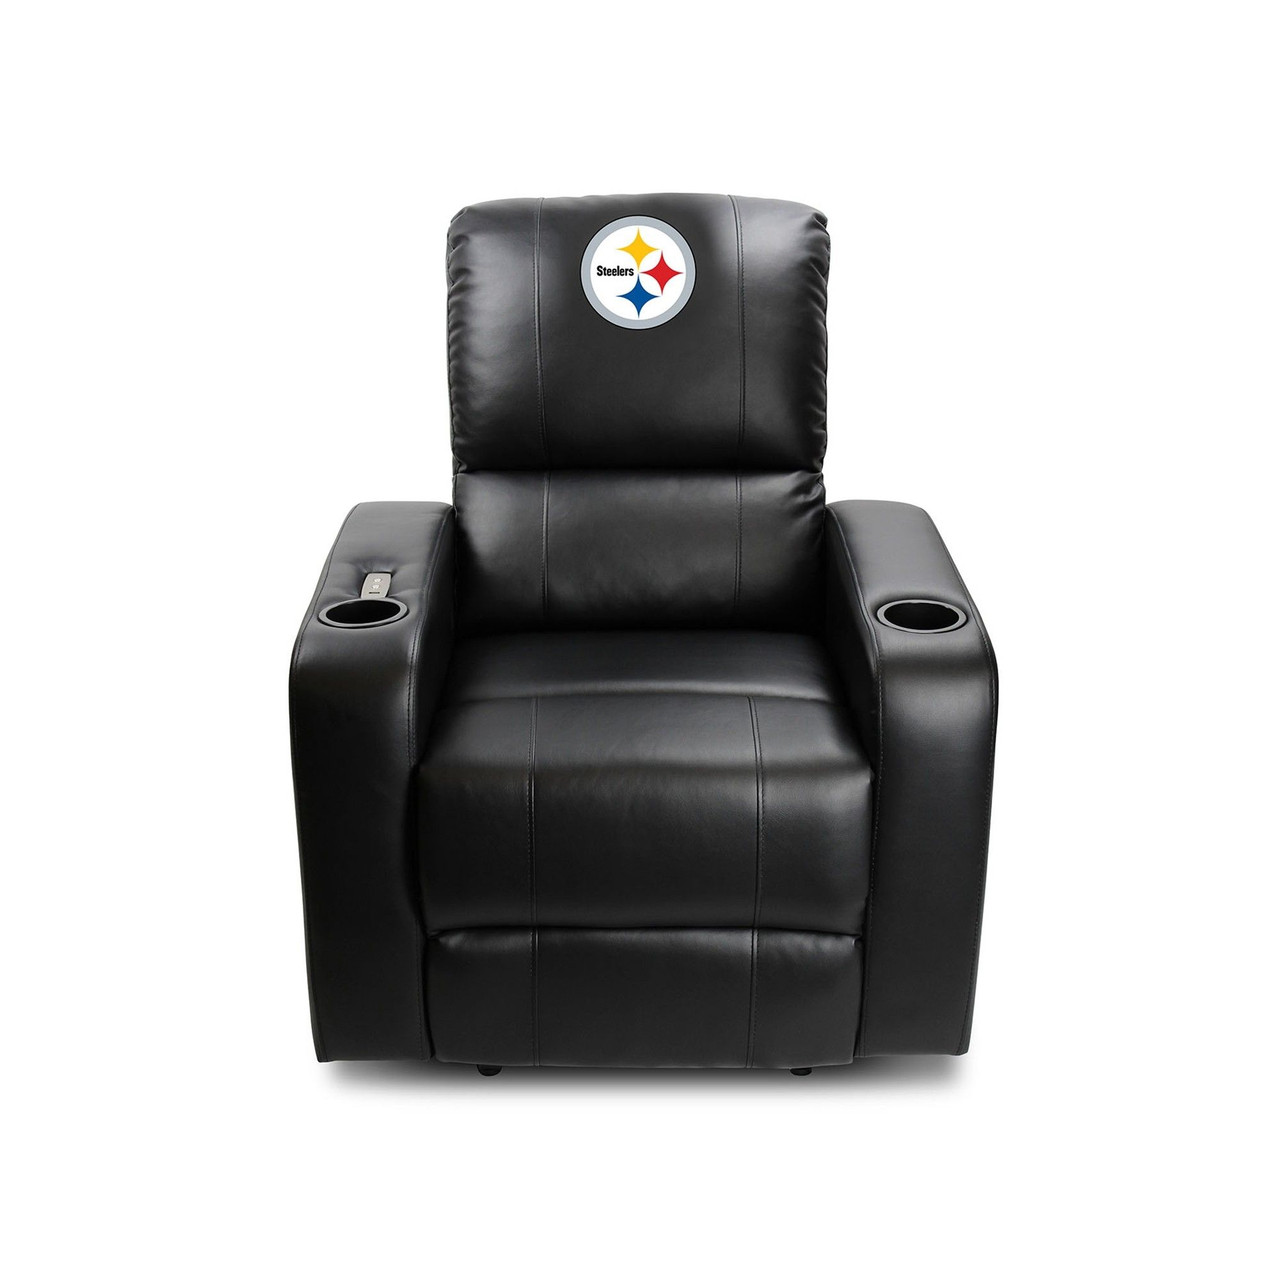 Pittsburgh, Pit, Steelers, 117-1004, Power, Theater, Recliner, Usb Port, Leather, Automatic, NFL, Imperial, 720801170046